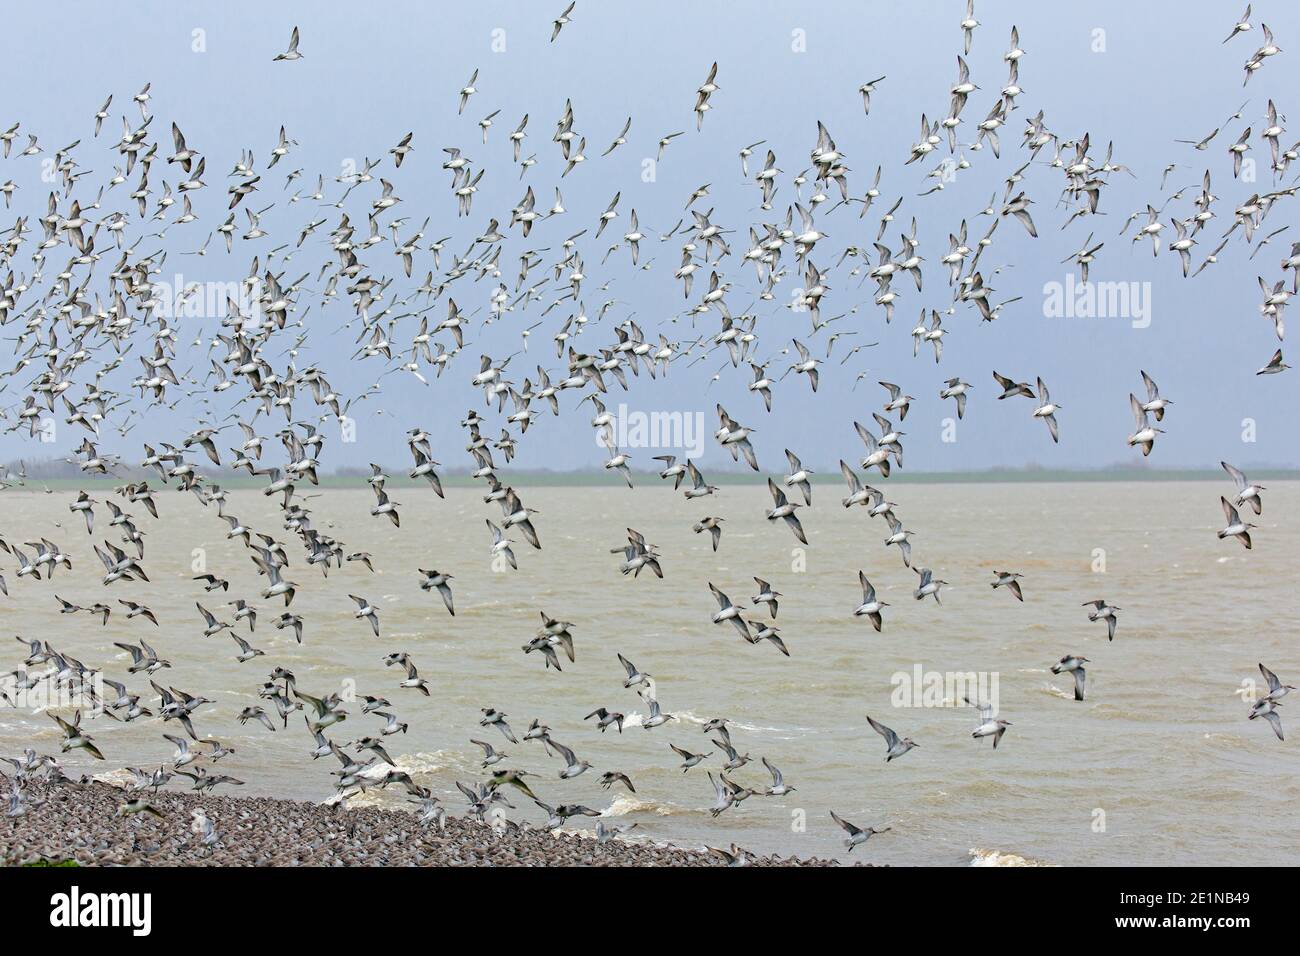 Red knots (Calidris canutus / Tringa canutus ) huge red knot flock in flight in non-breeding plumage taking off from beach in winter along the coast Stock Photo